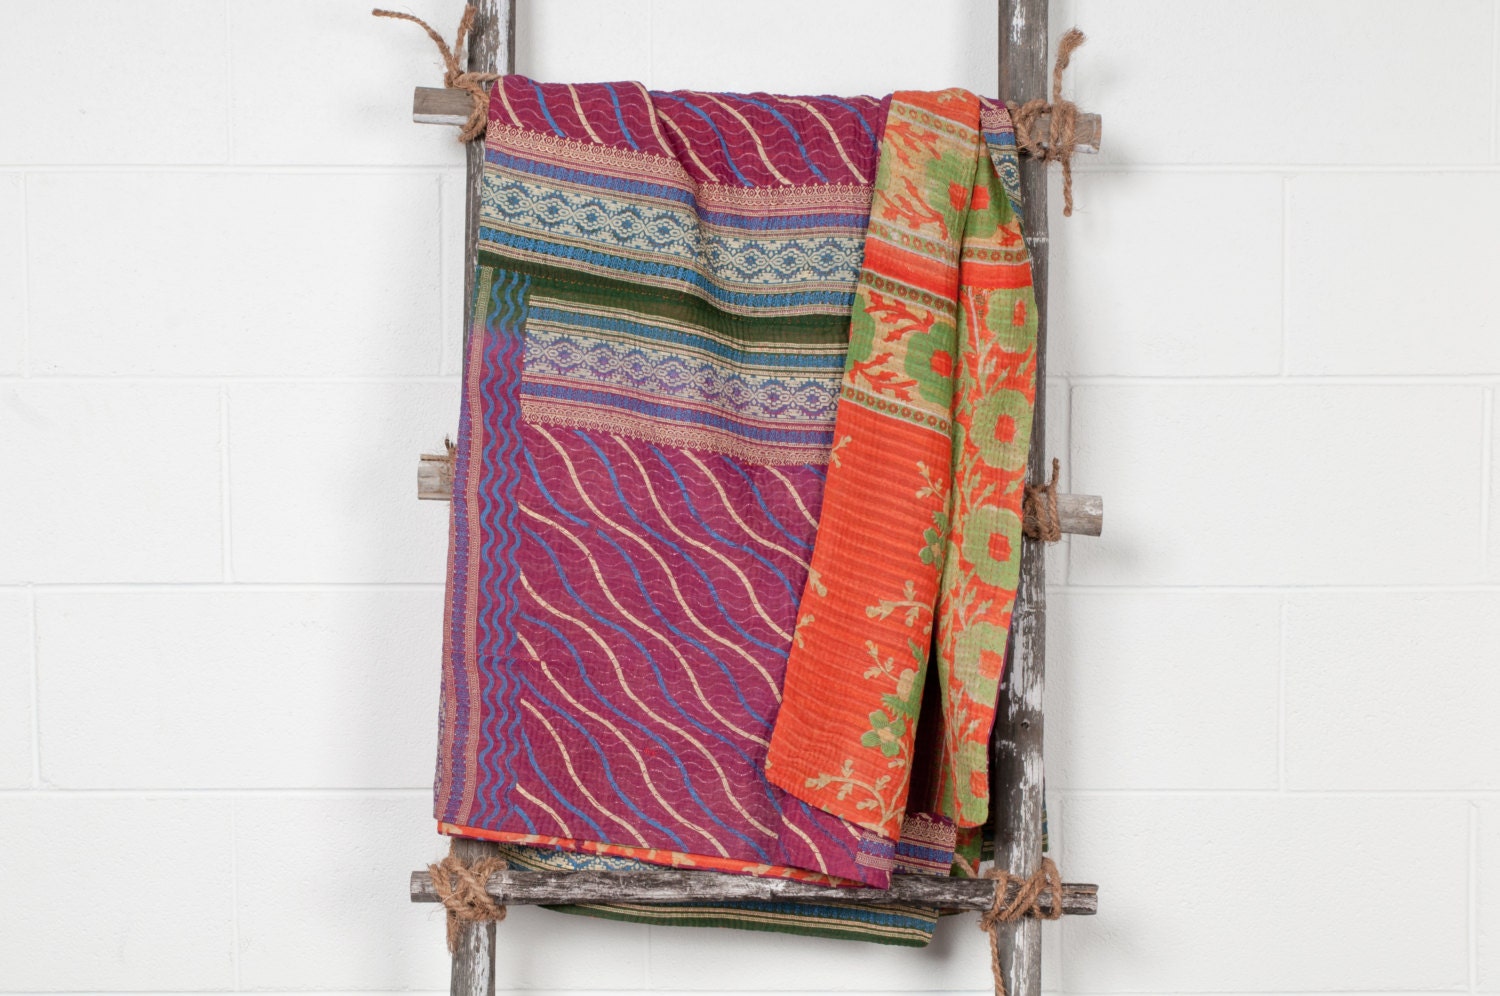 Single or King size Vintage Kantha Quilt - Damson Plum over Persimmon - AnotherWorldTrading